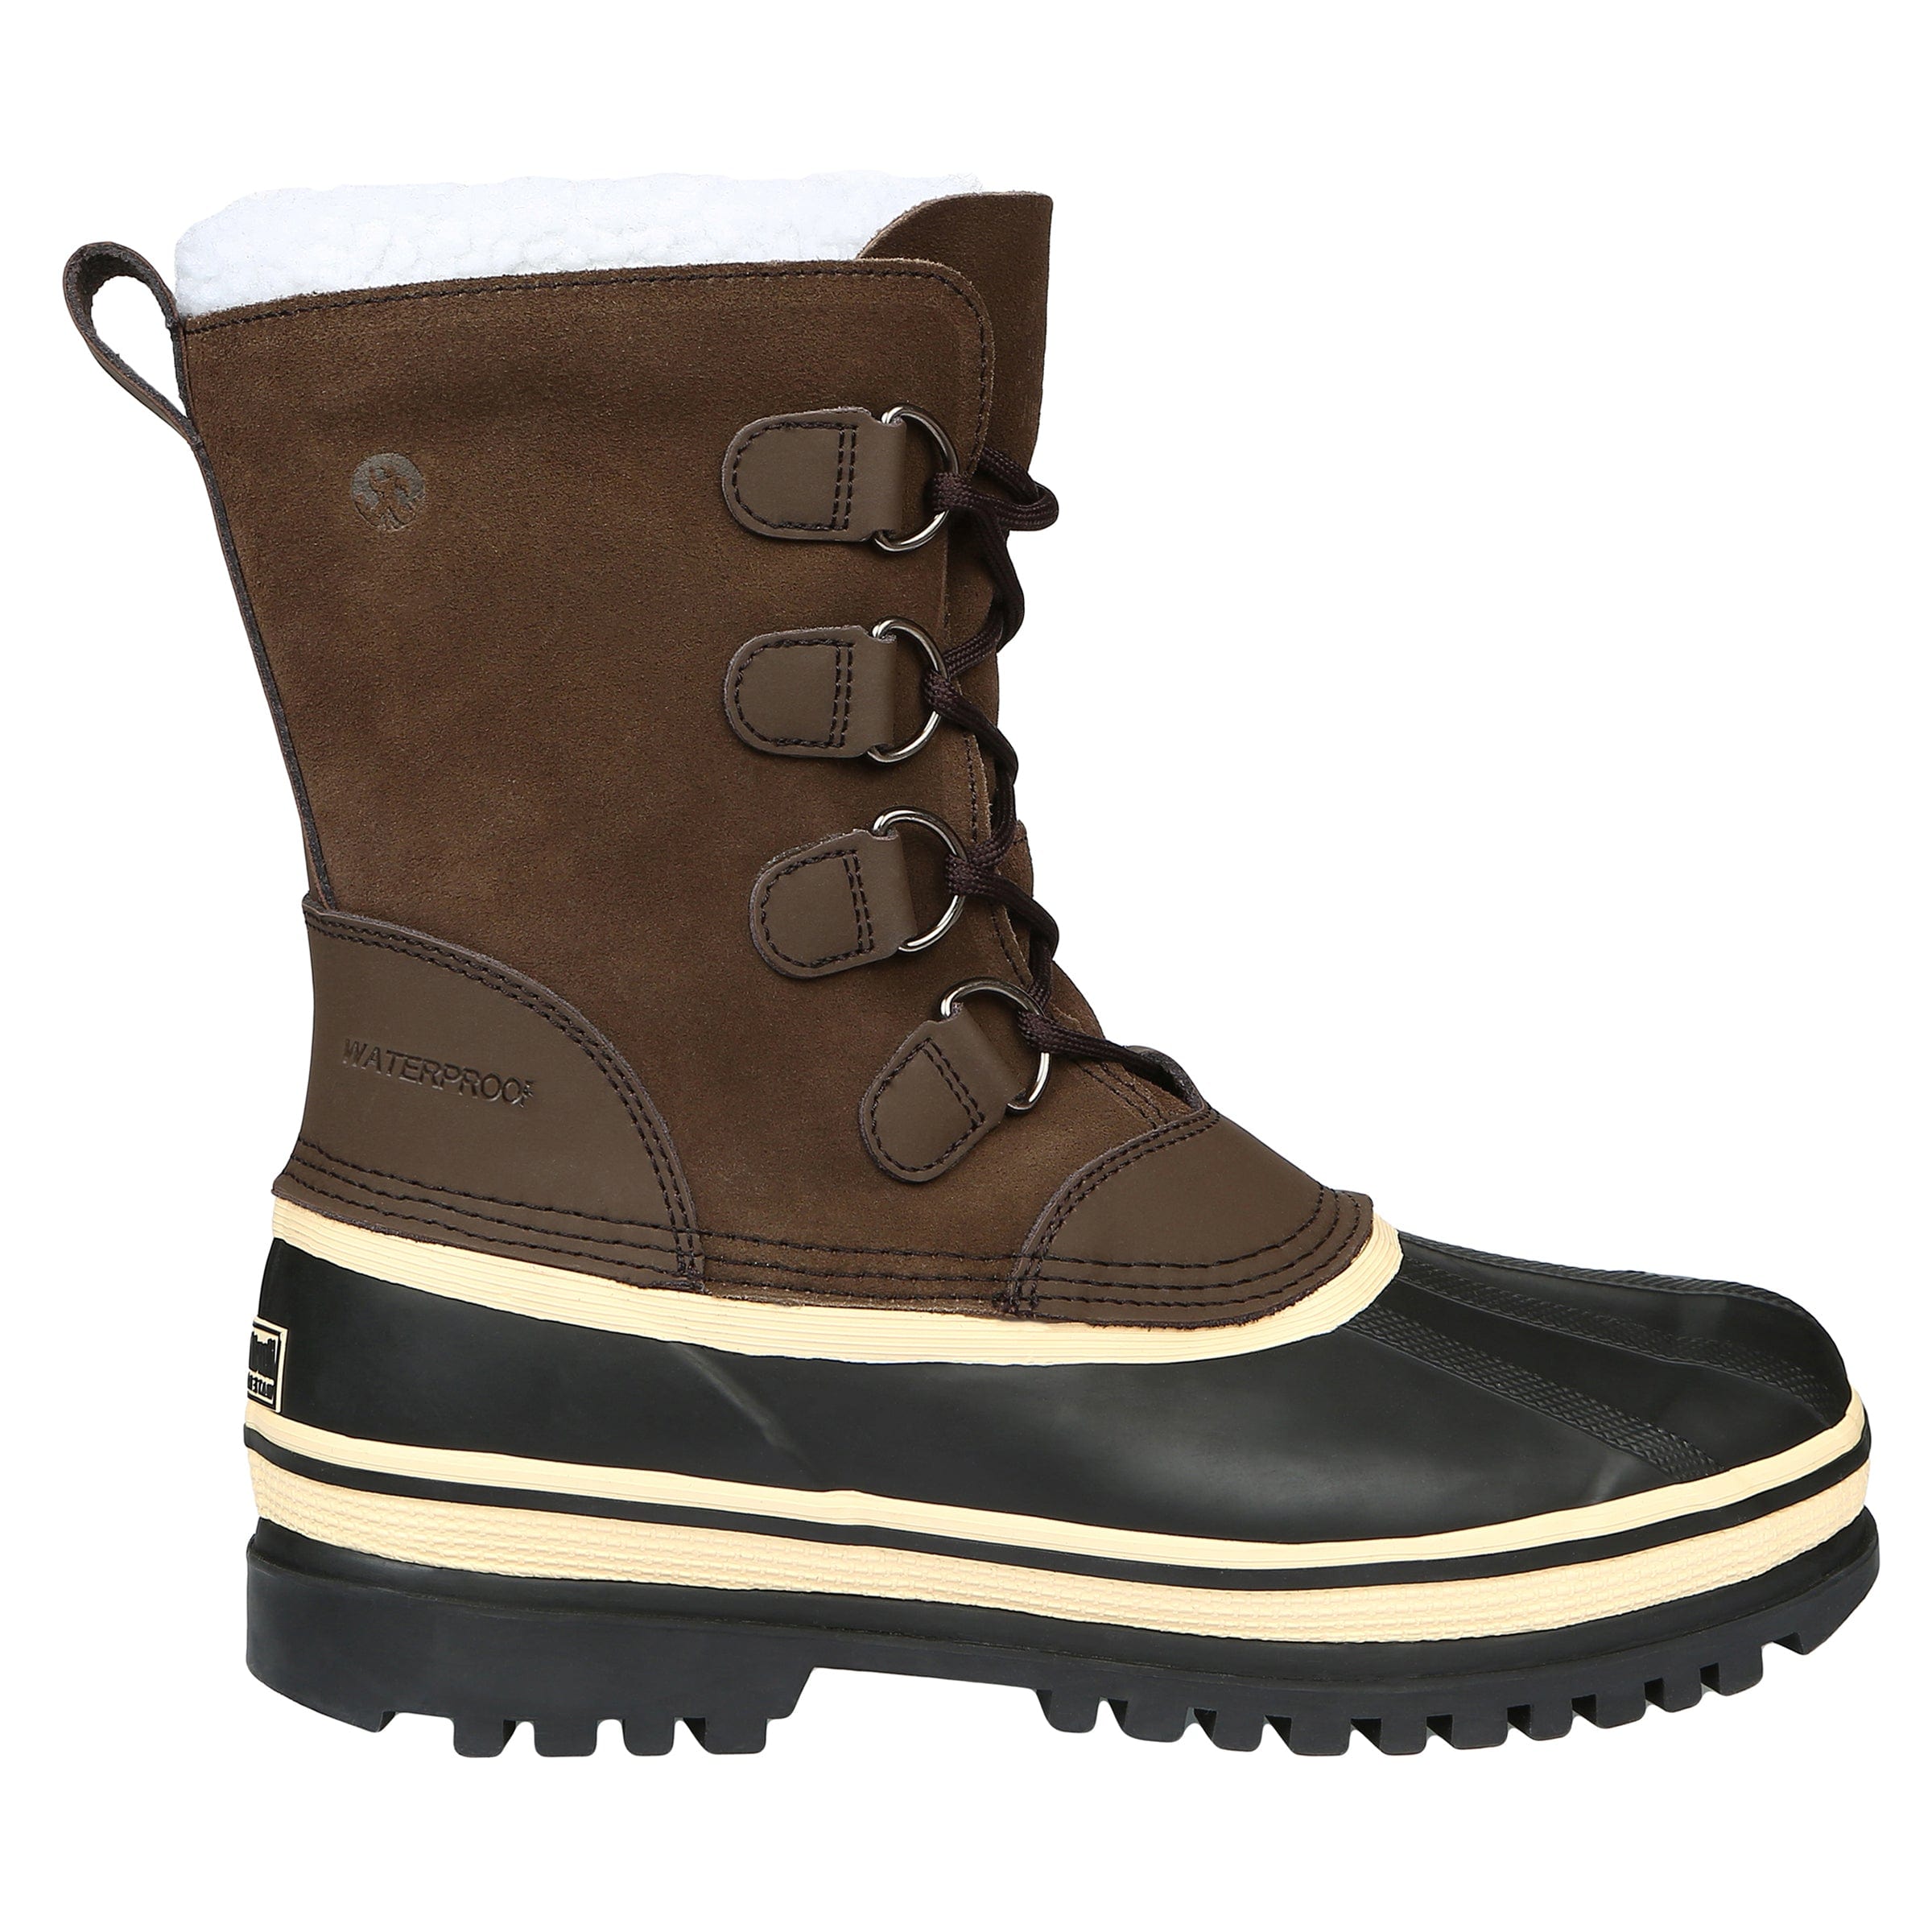 Men's Back Country Waterproof Winter Snow Boot - Northside USA